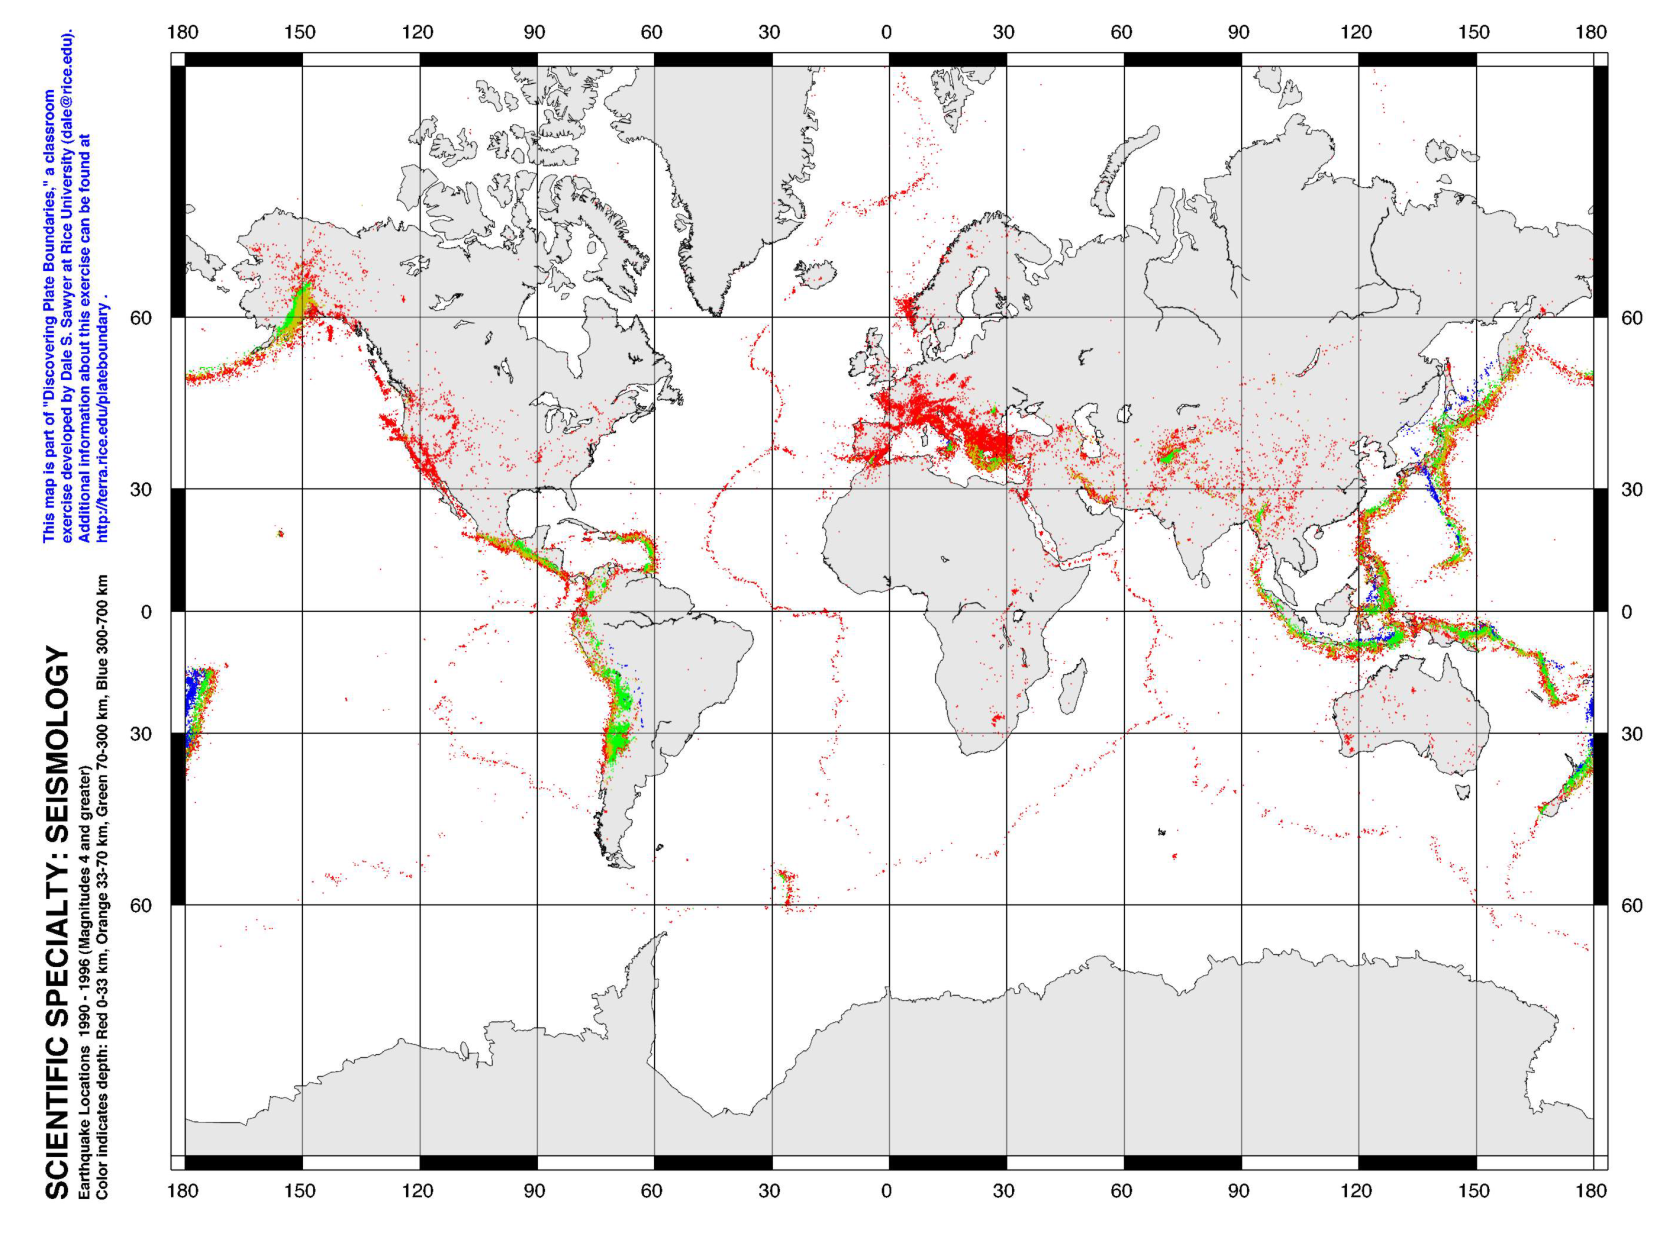 A Scientific Network for Earthquake, Landslide and Flood